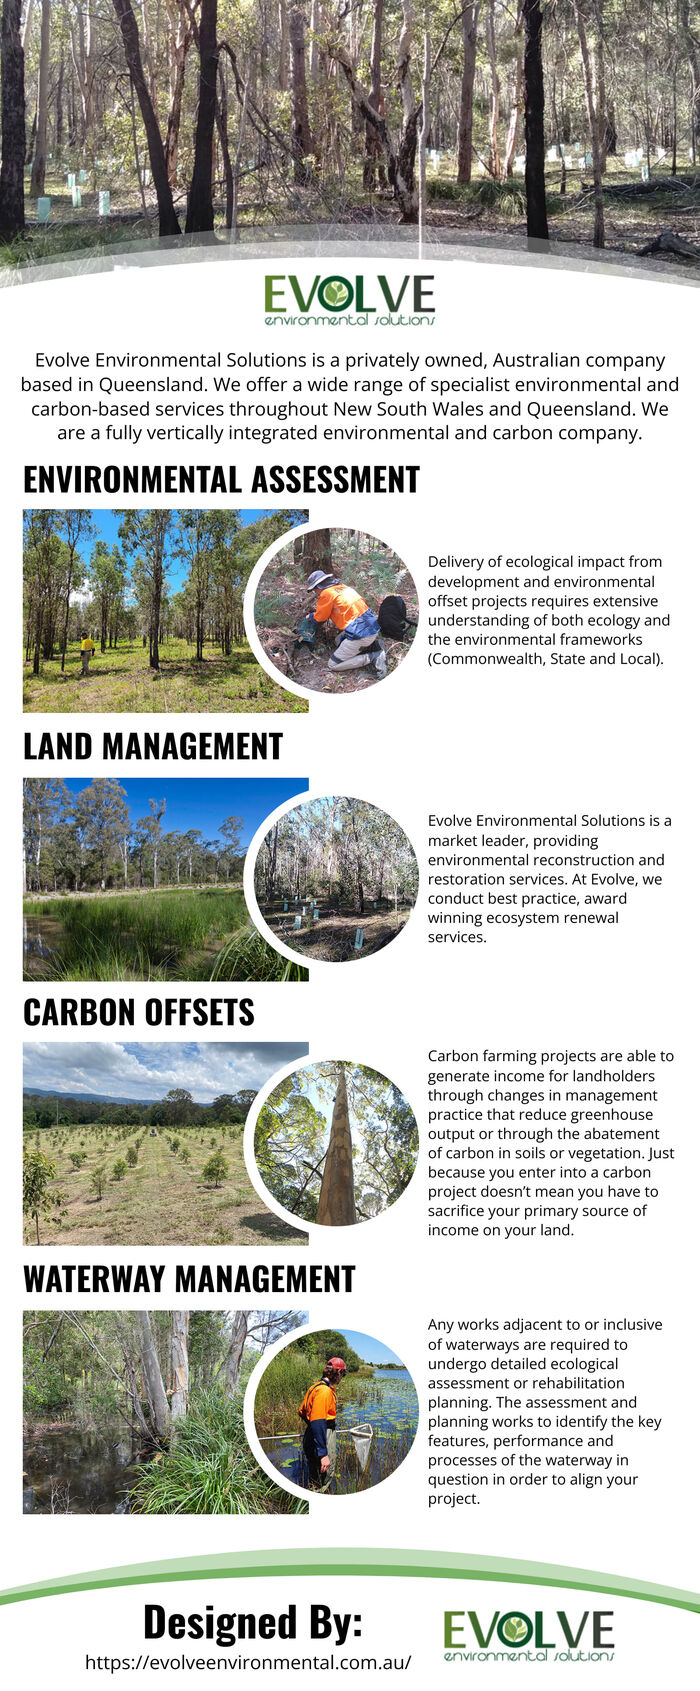 This infographic is designed by Evolve Environmental Solutions